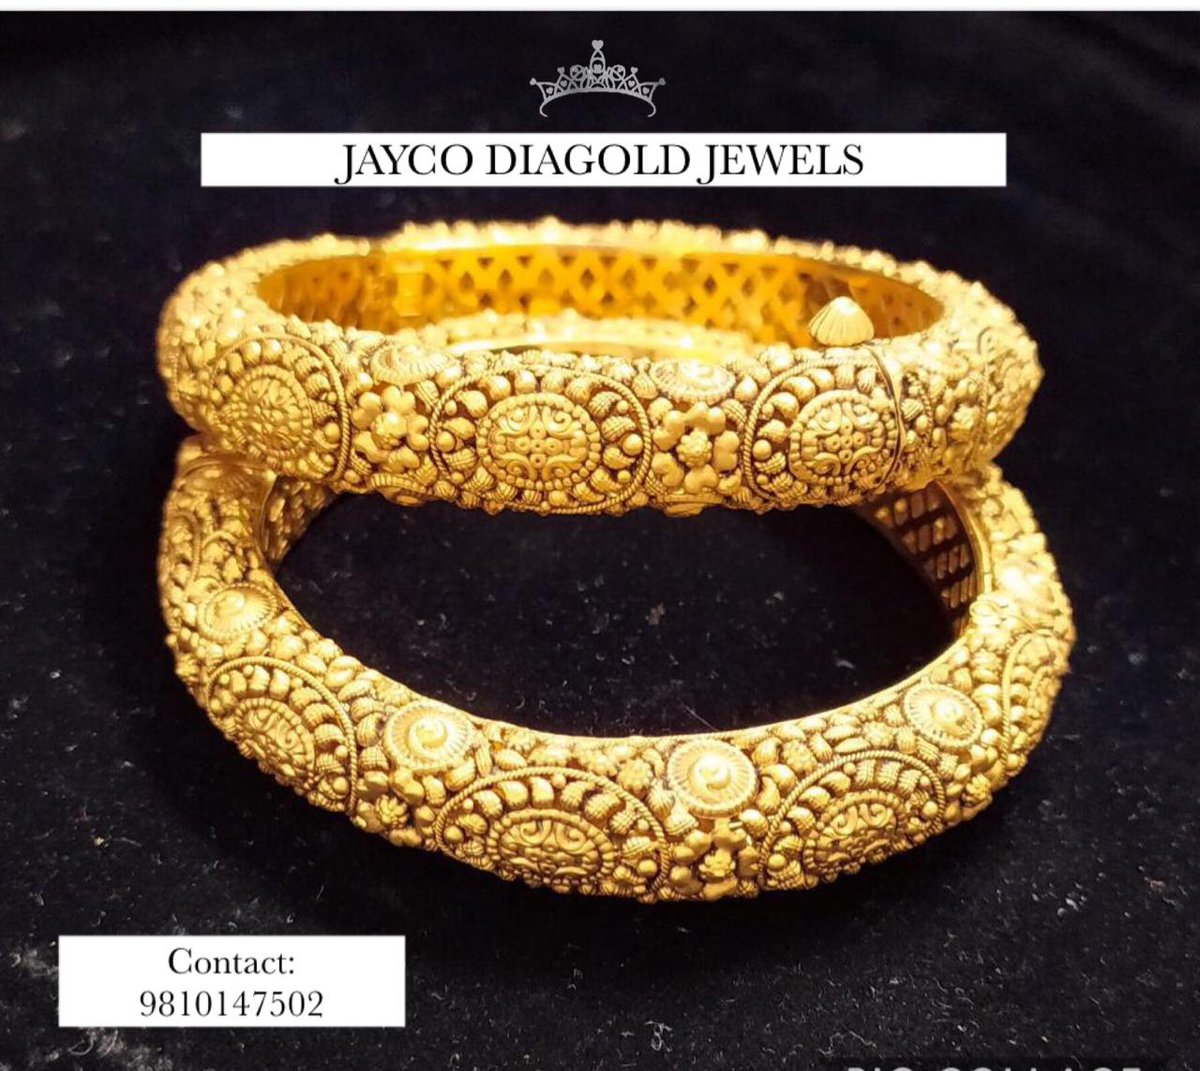 THE BANGLES of your heritage 👑. 
Pure gold jewellery, get it from JAYCO DIAGOLD JEWELS 💎 
CONTACT: 9810147502

#instajewellery #jewellery #indianjewellery #jewelleryofinstagram #designerjewellery #bridaljewellery